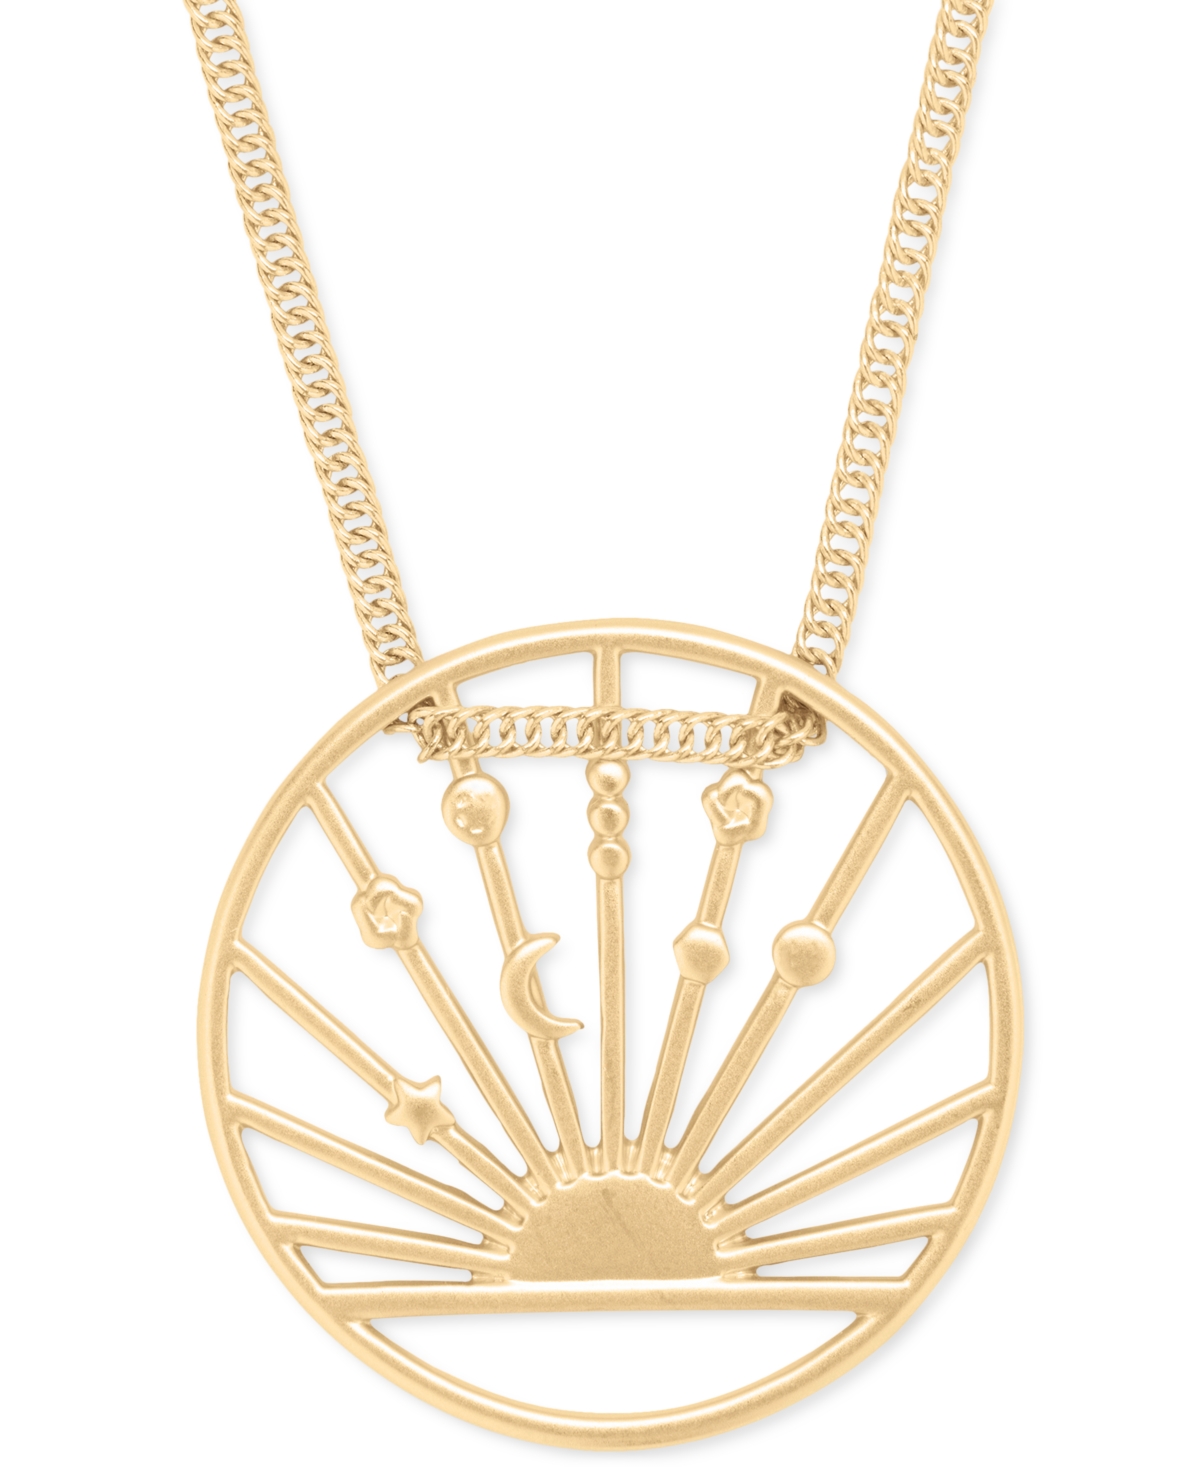 Lucky Brand Gold-tone Sunray Pendant Necklace, 16" + 3" Extender